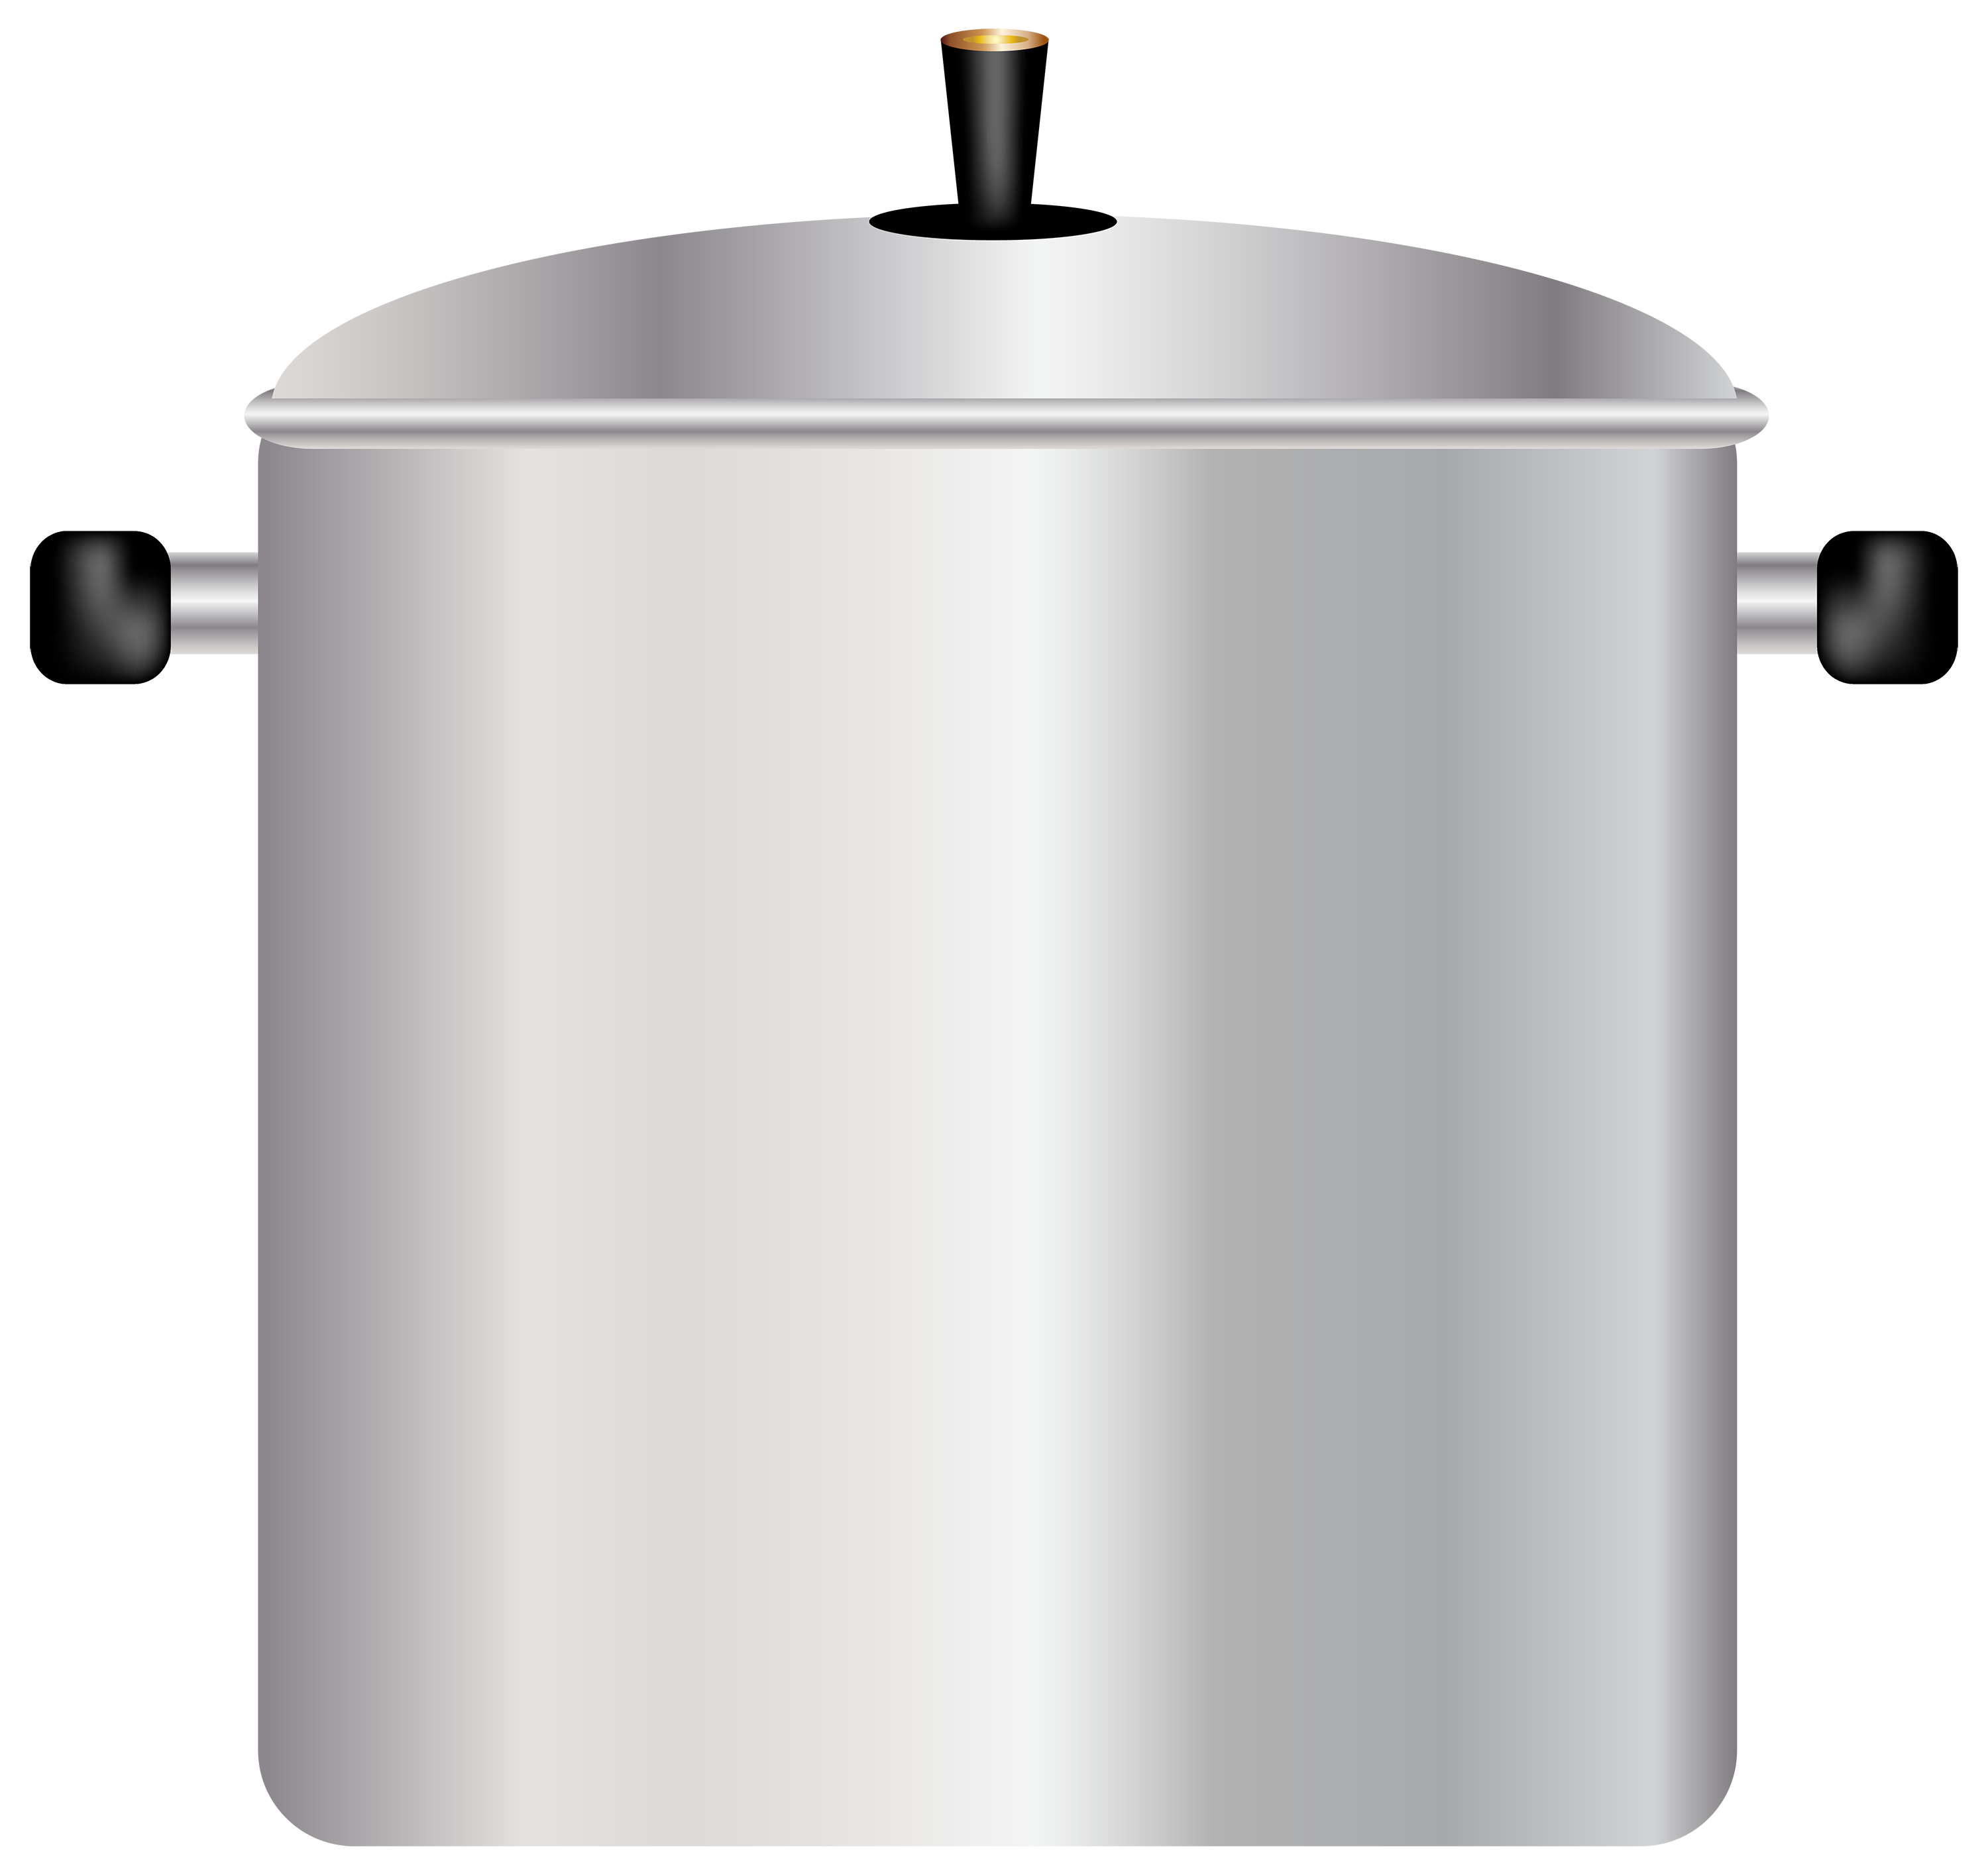 Steel Cooking Pan PNG Clipart Background